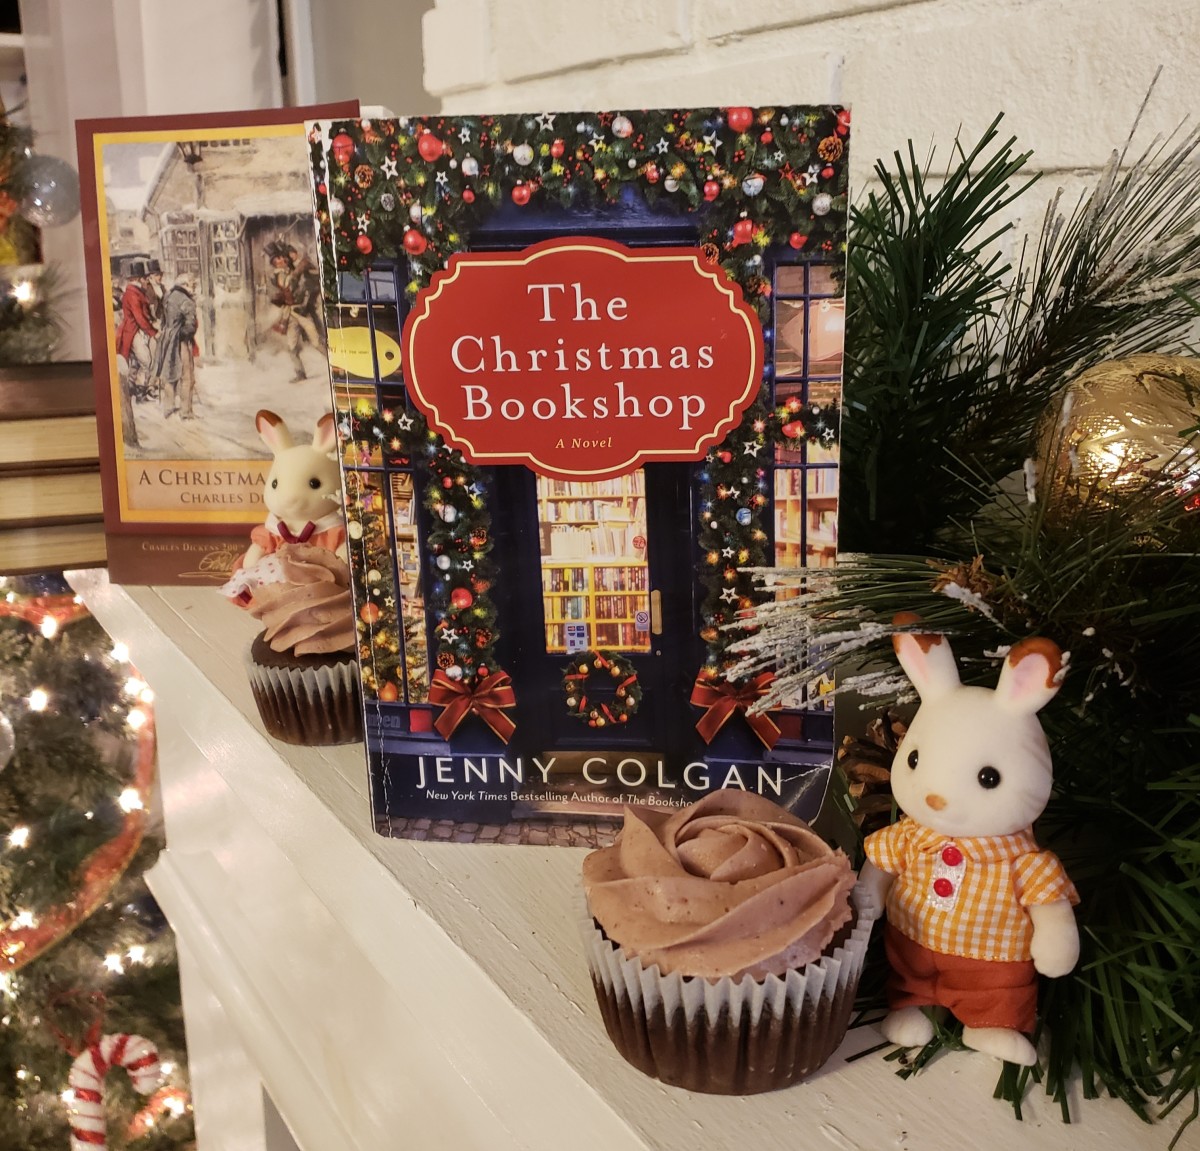 the-christmas-bookshop-book-discussion-and-mulled-wine-cupcakes-recipe